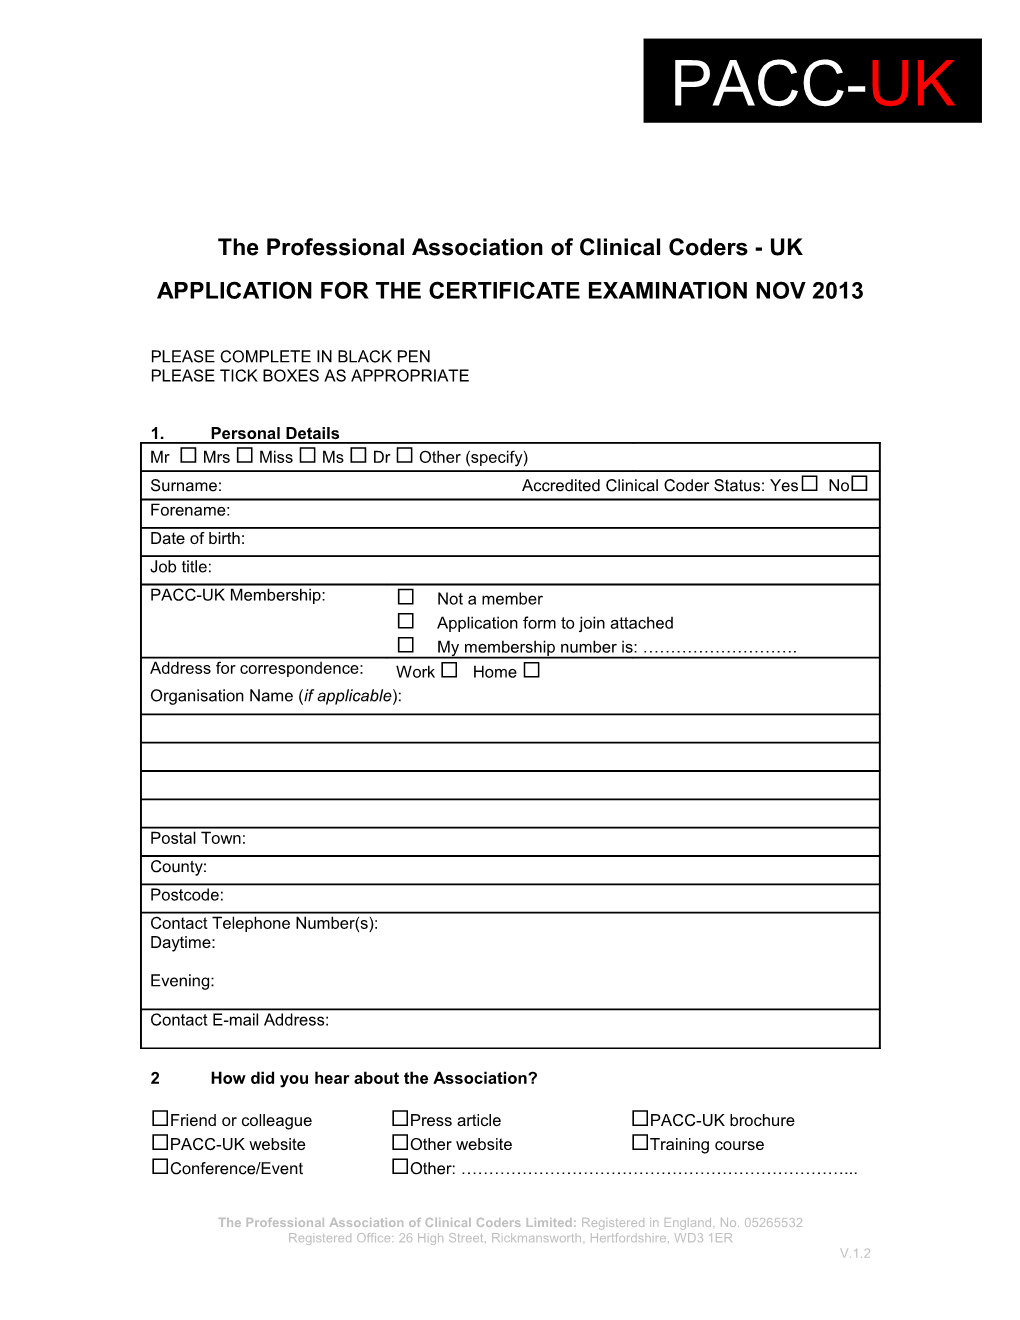 The Professional Association of Clinical Coders - UK